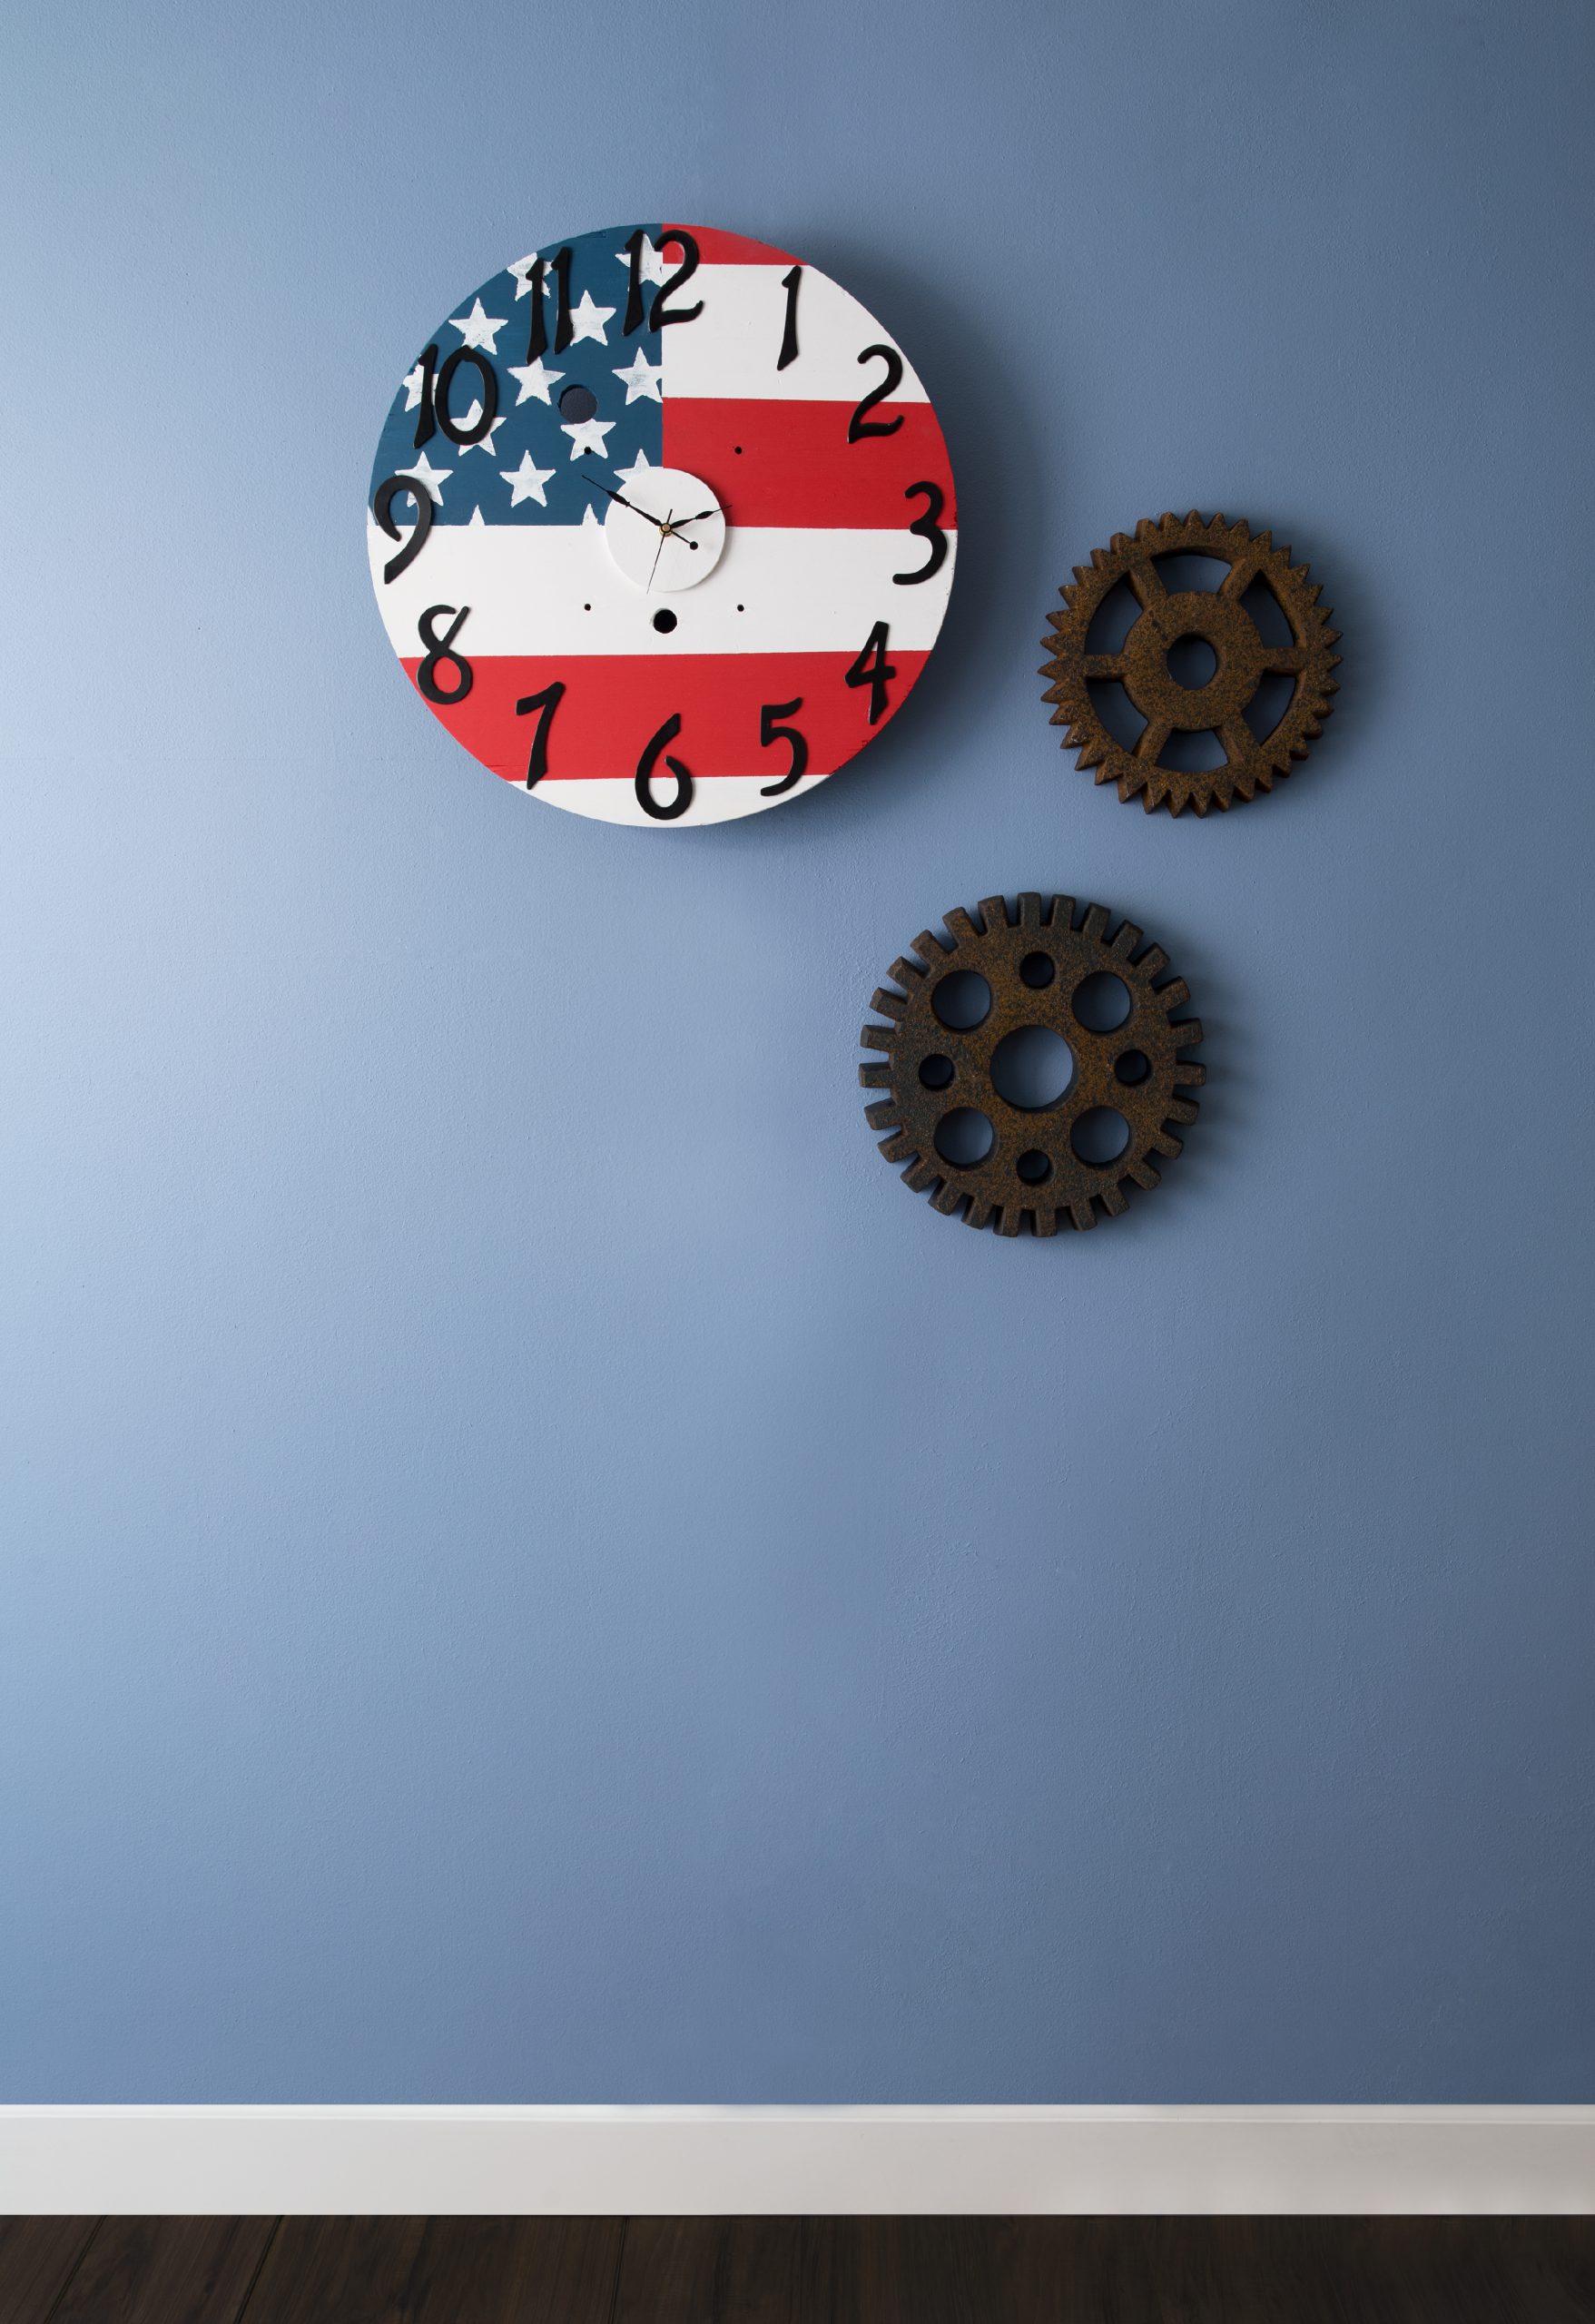 A clock hanging on a blue wall. The clock is painted to look like the patriotic flag.